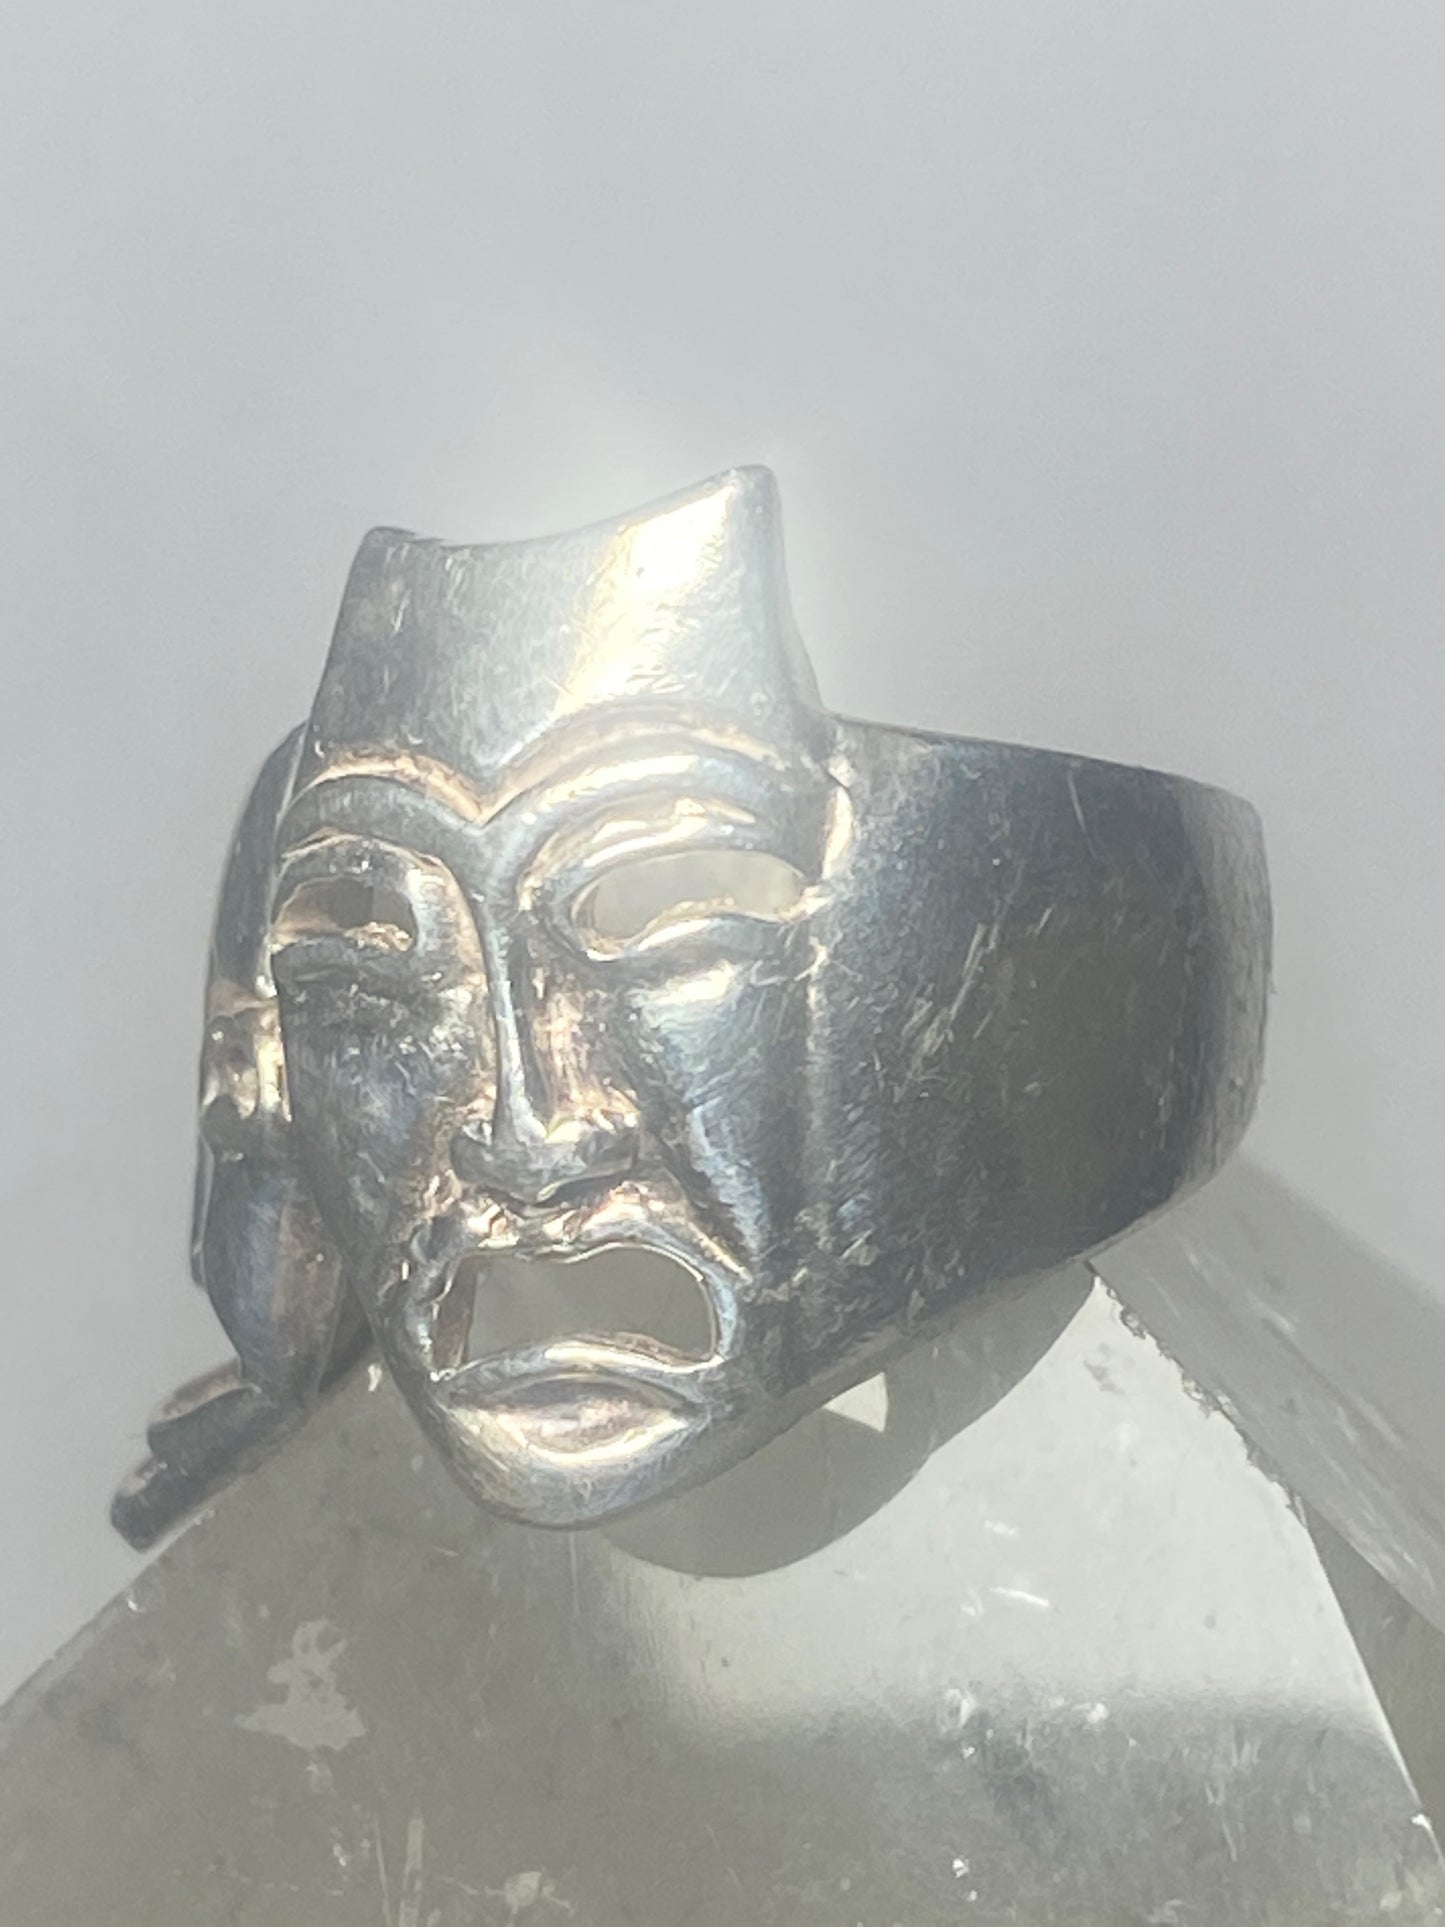 Tragic comic ring size 6.50 sterling silver tragedy comedy theatrical band theater women